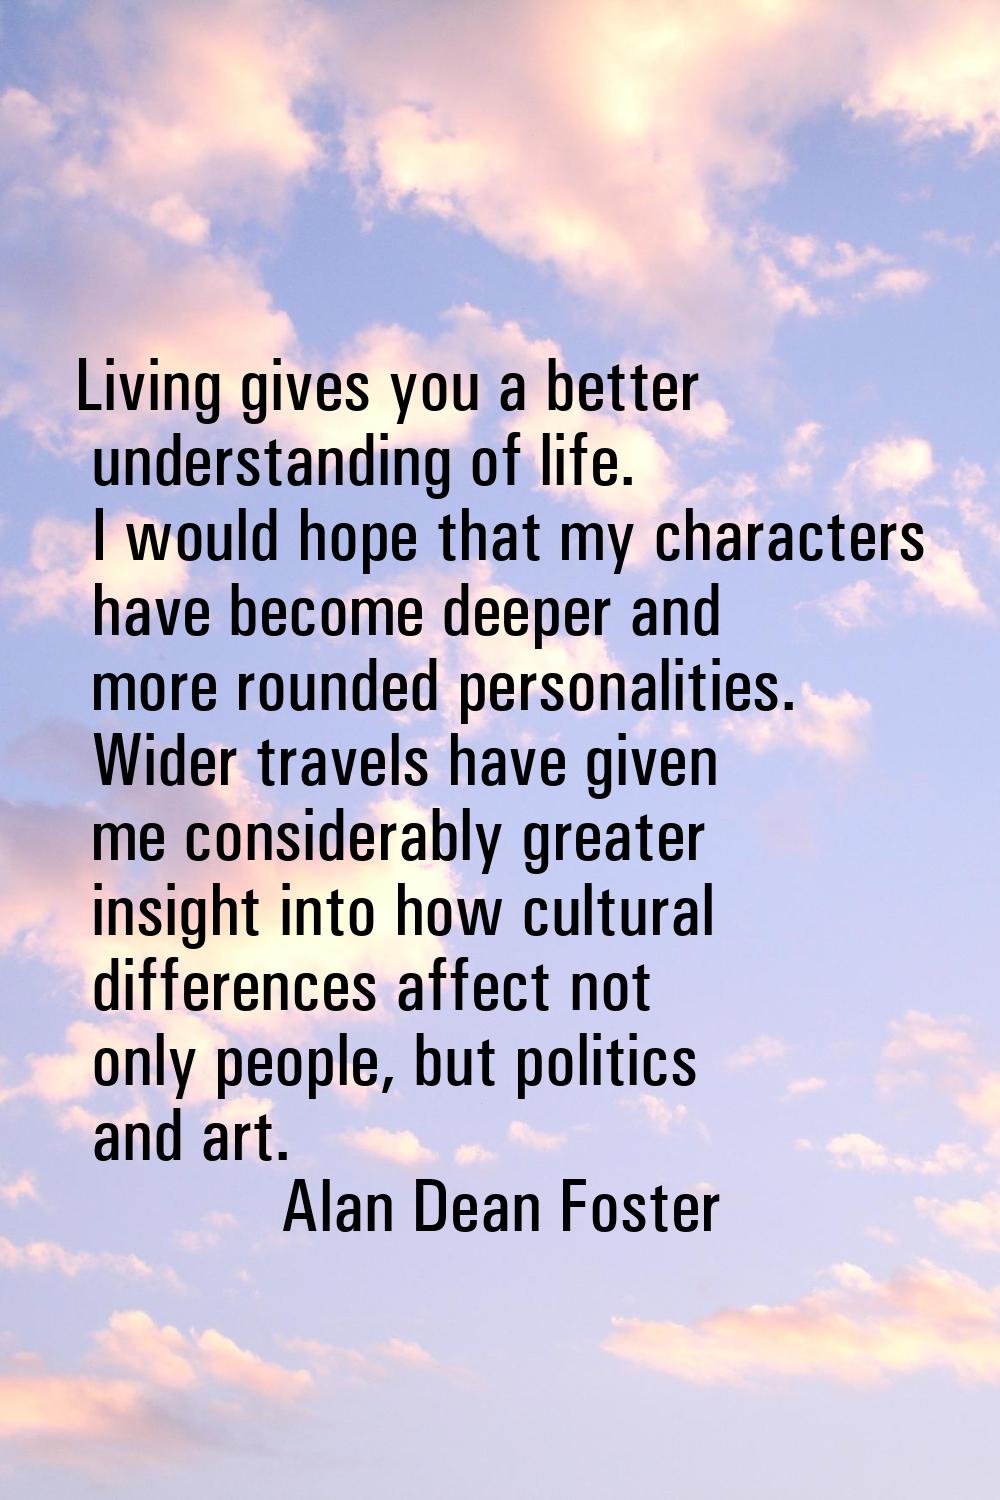 Living gives you a better understanding of life. I would hope that my characters have become deeper